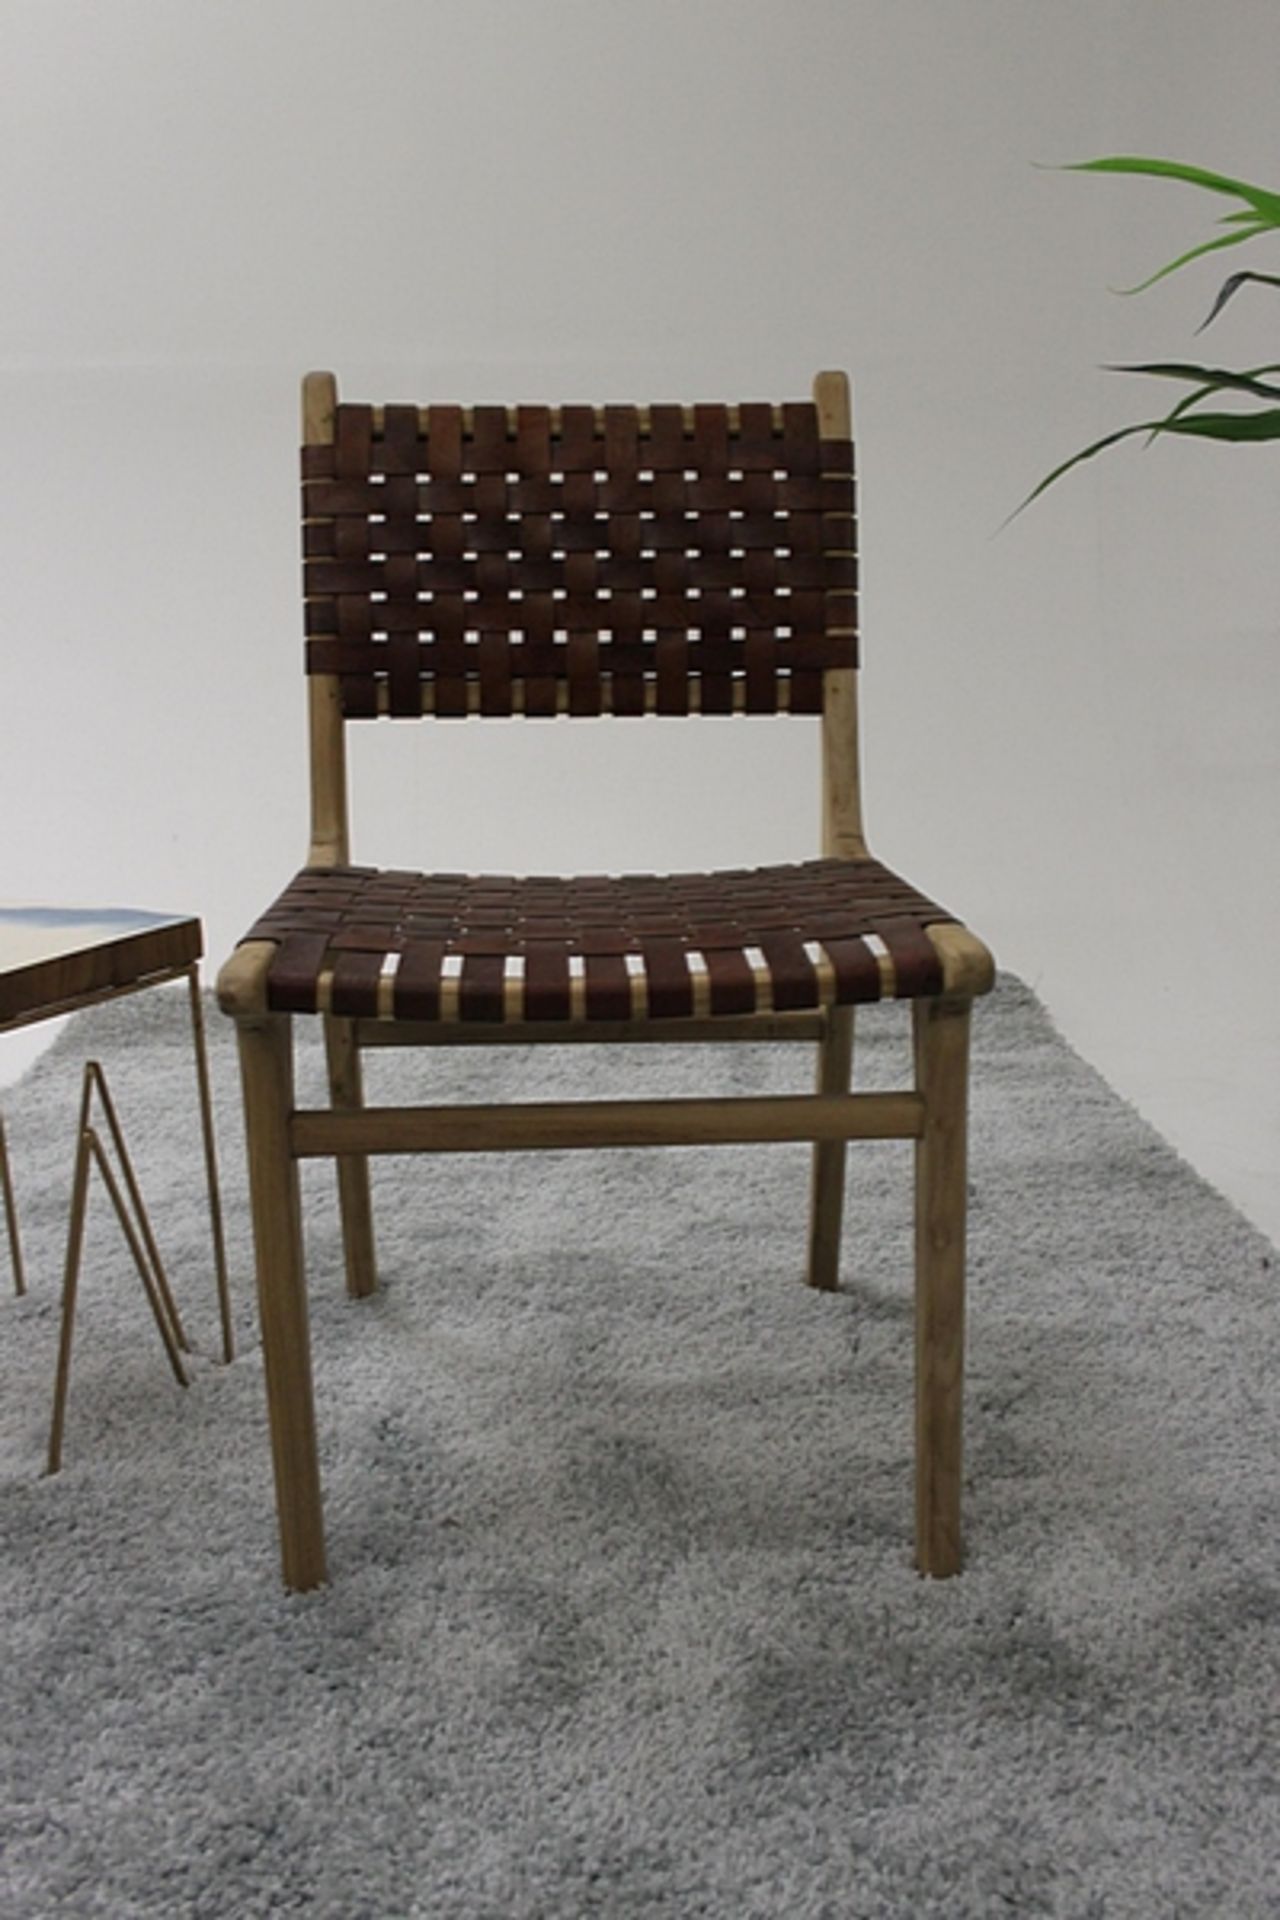 Tan Woven Strap Chair - Image 3 of 3